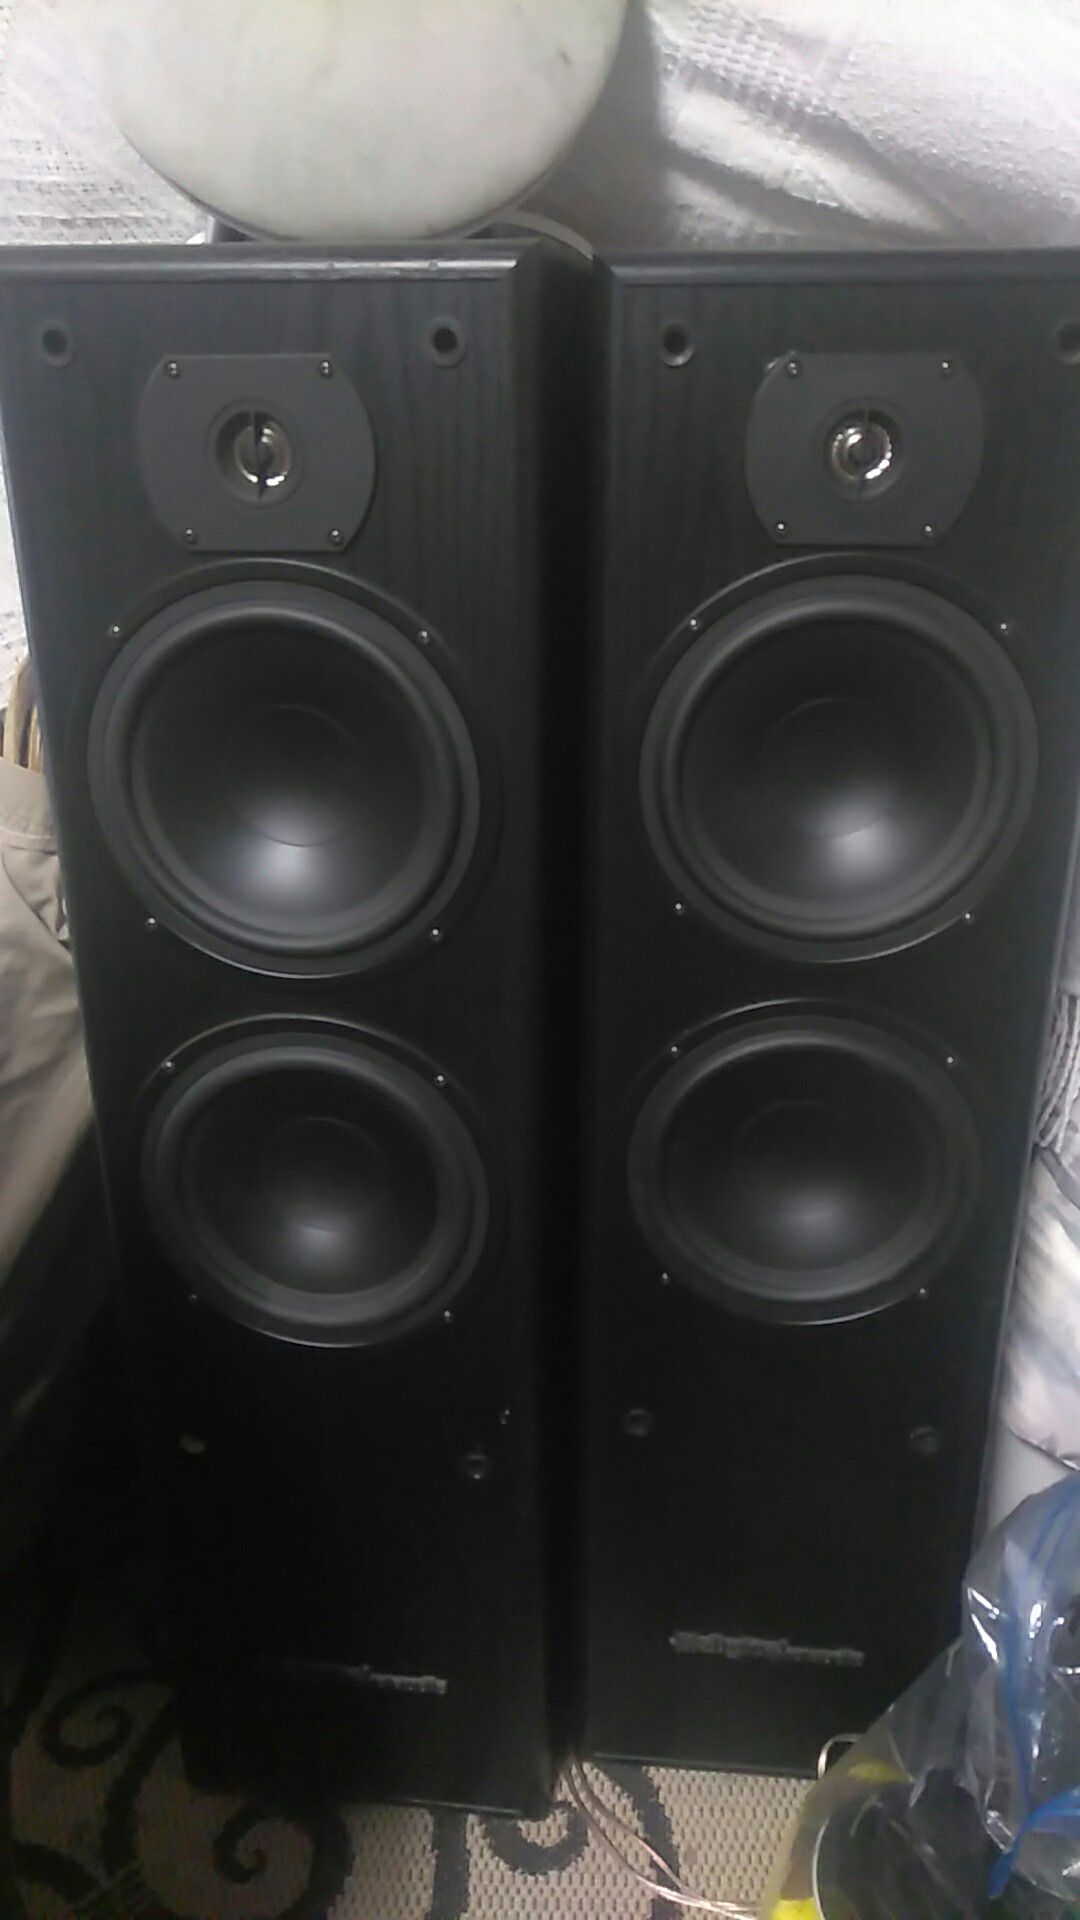 Audio acoustics home stereo speakers very clean and crisp sound